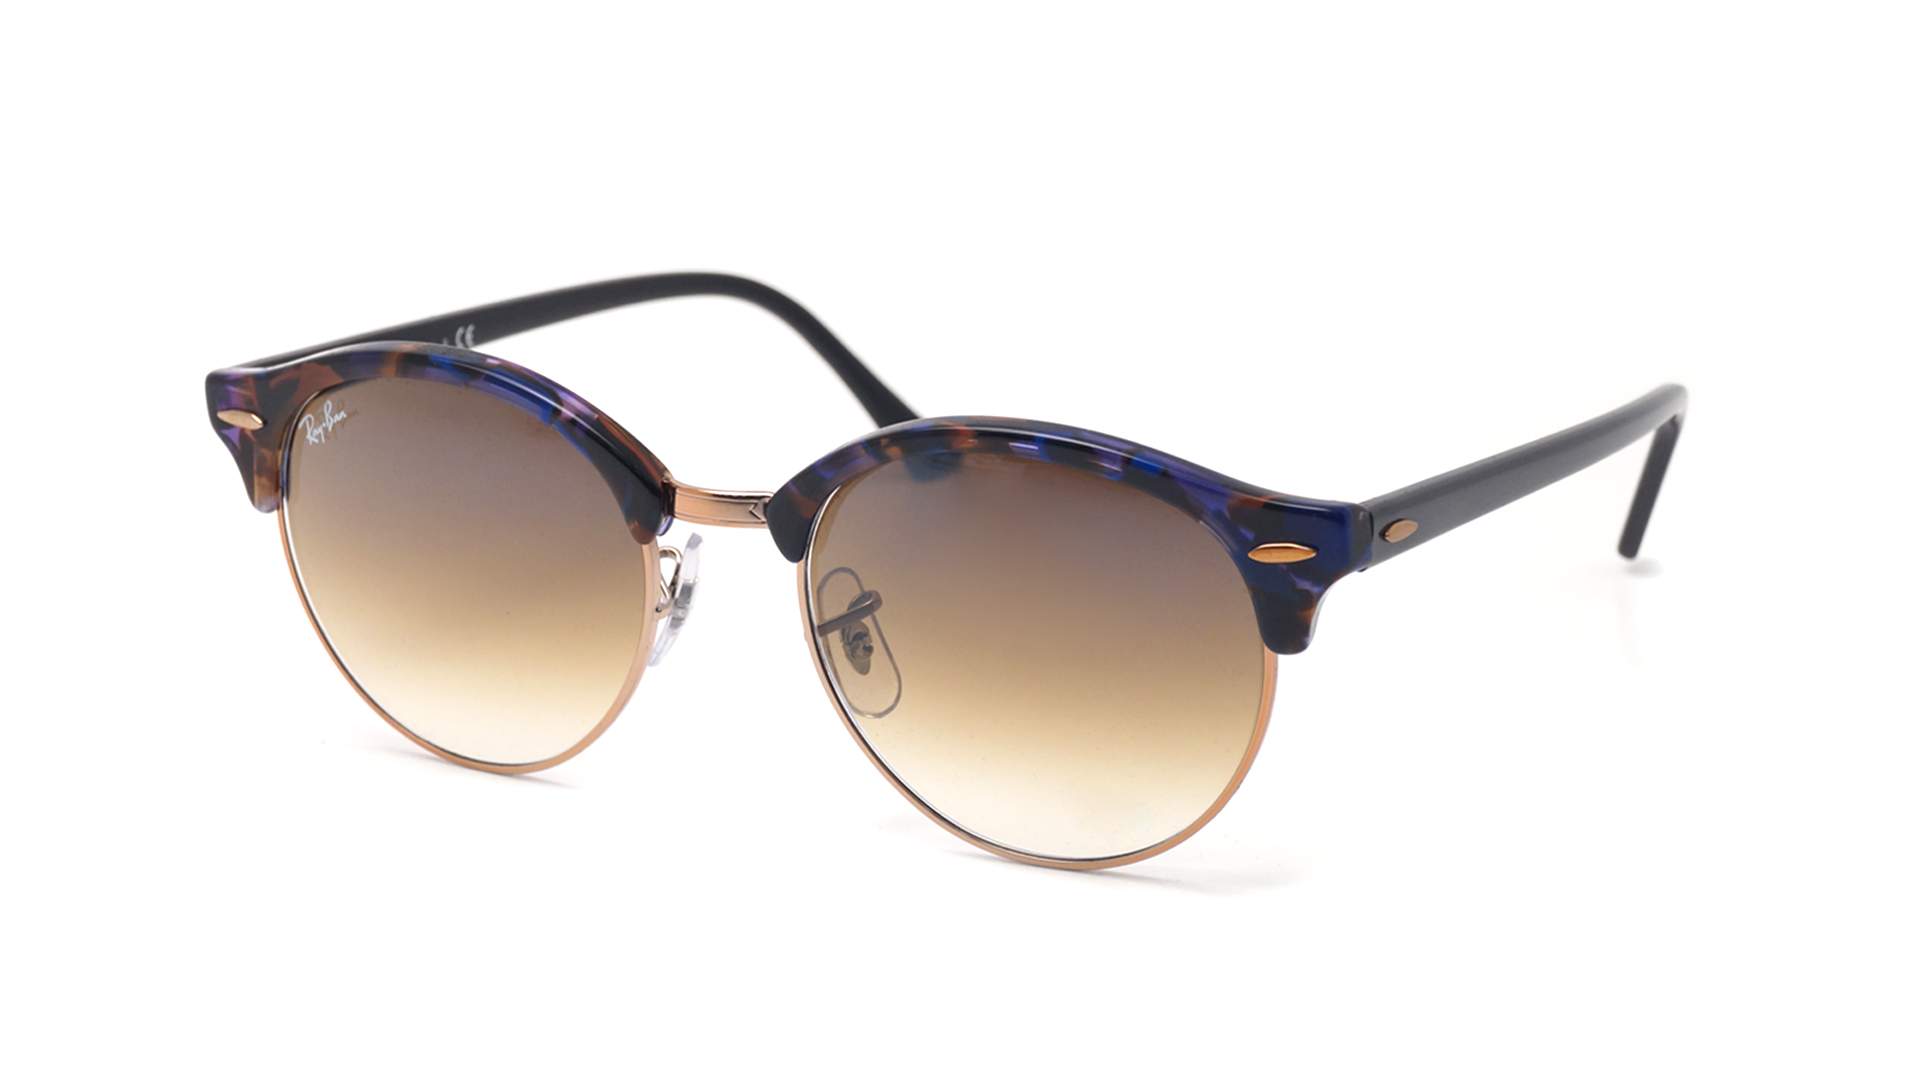 Ray-Ban Clubround Tortoise RB4246 1256 